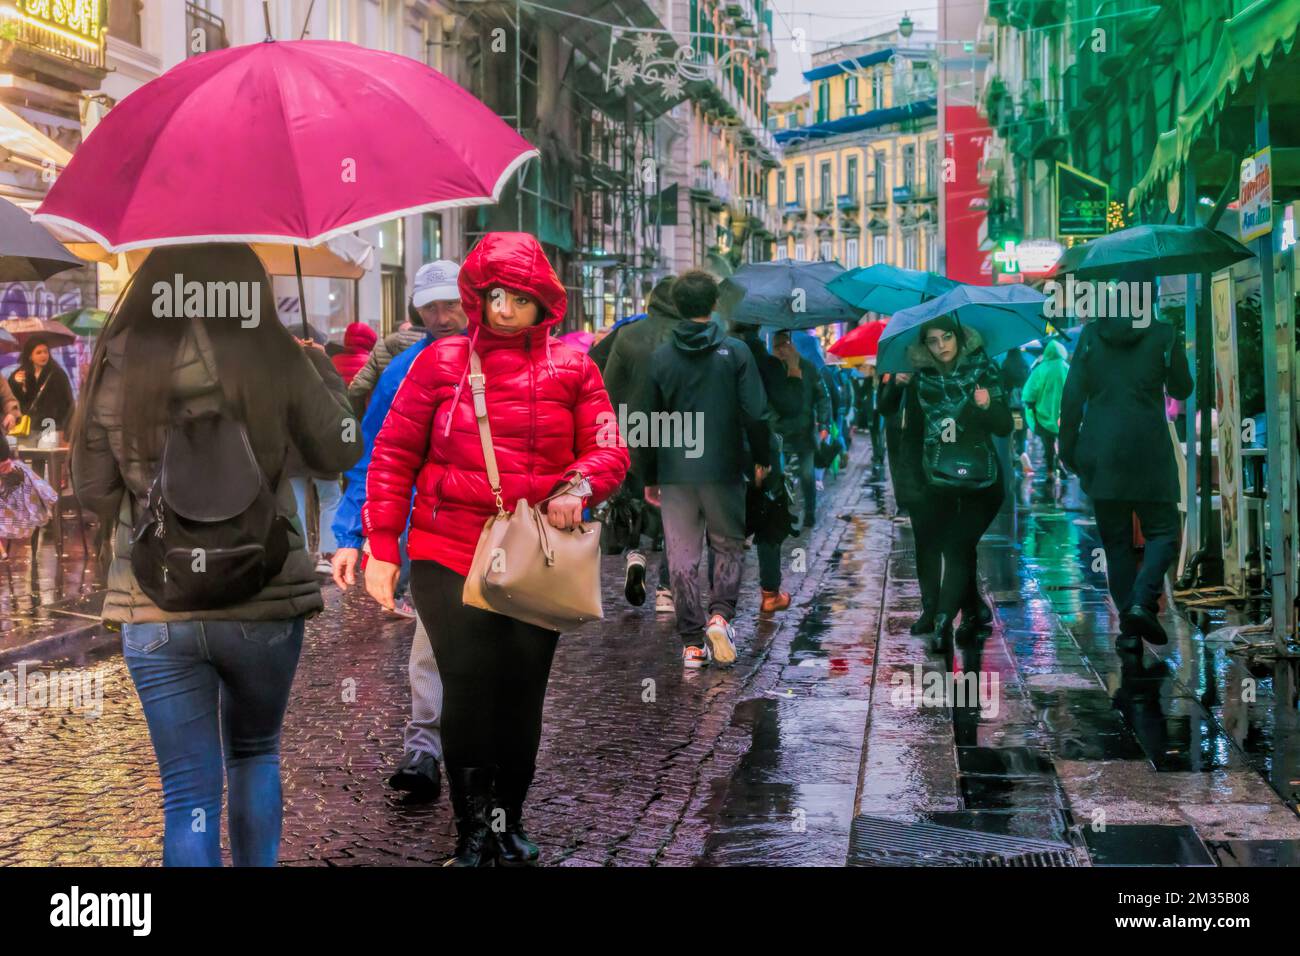 Naples, Italy - December 10, 2022: On a rainy day people stroll in via Toledo, the street is crowded in the pre-Christmas period. Stock Photo